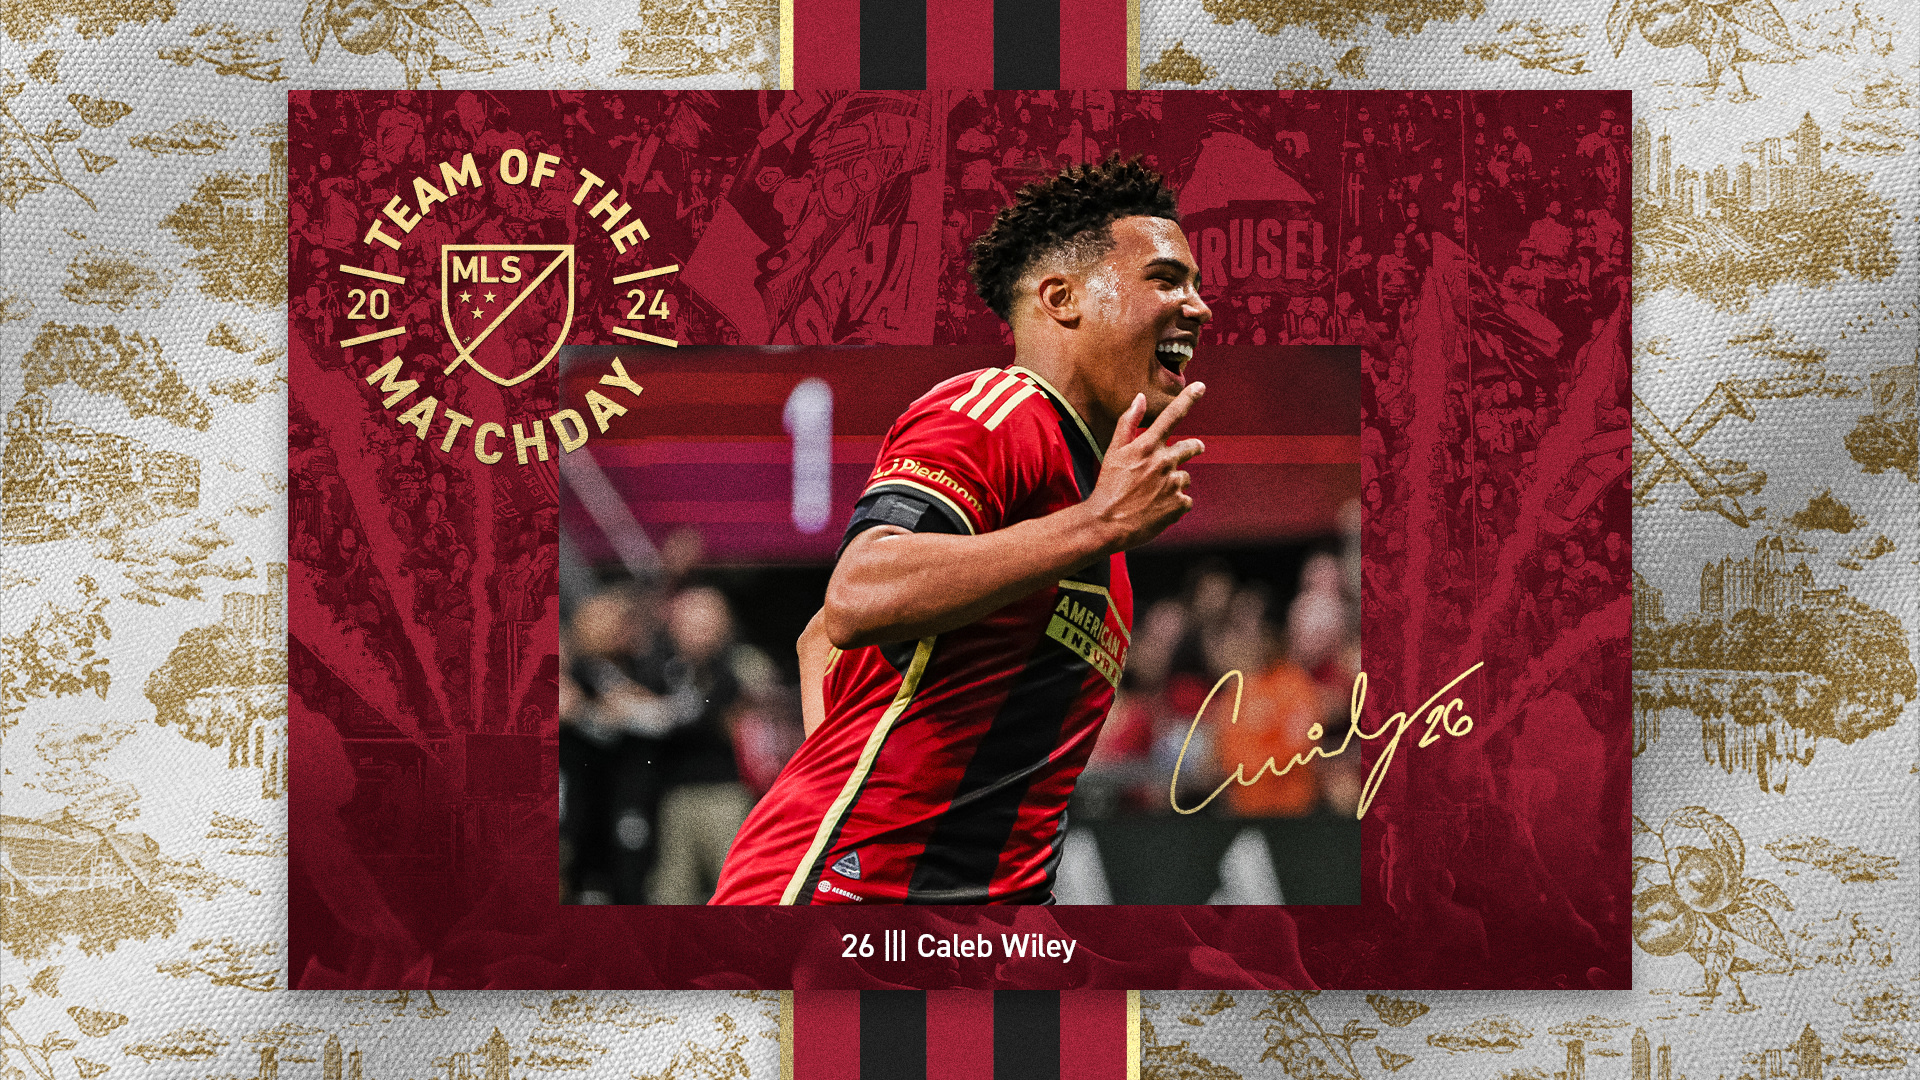 Caleb Wiley awarded place on MLS Team of the Matchday for long-range golazo | Atlanta United FC